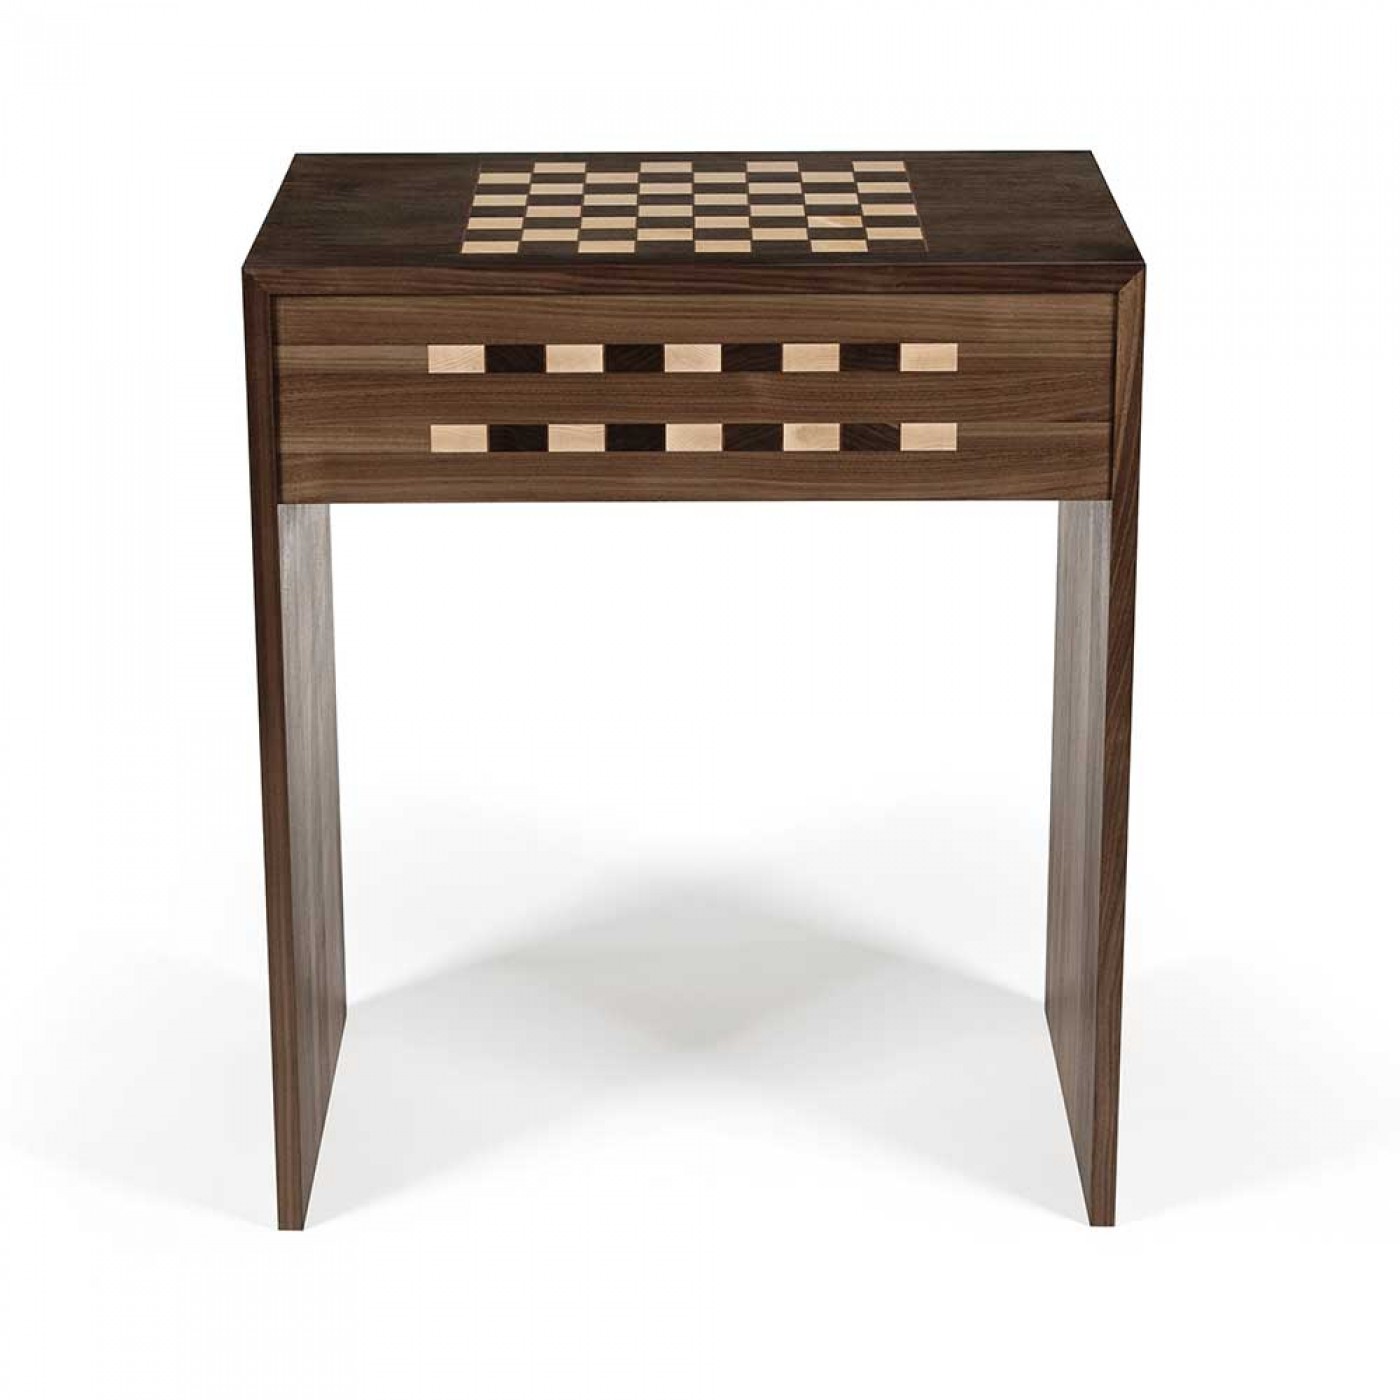 'Winston' (Krailler Collection) | Solid walnut & maple chess table